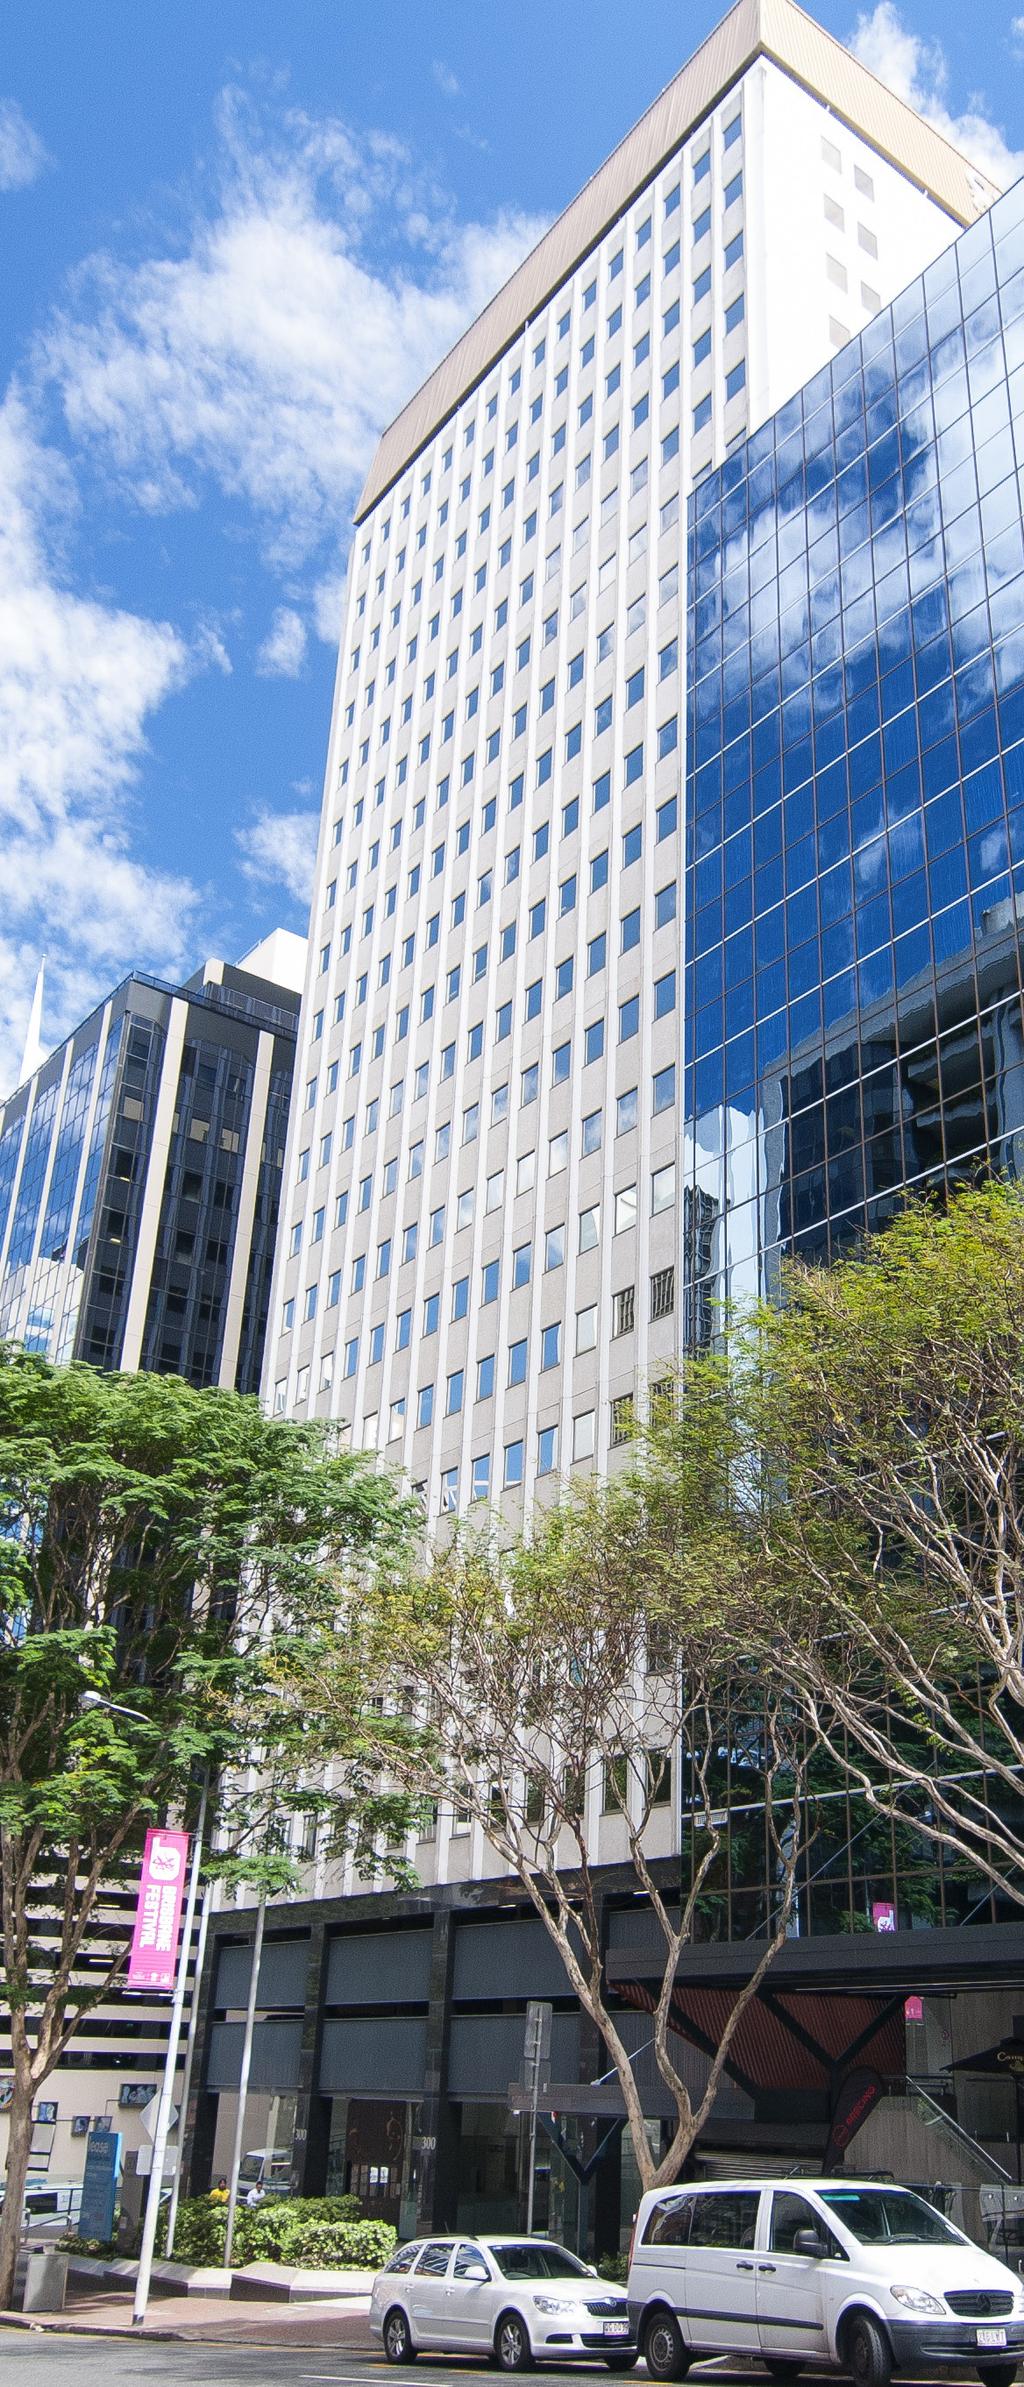 plays. This year in the Brisbane CBD, we have seen buildings with significant vacancy transact at average initial yields of 9.4 per cent and capital values of $2,969/m².